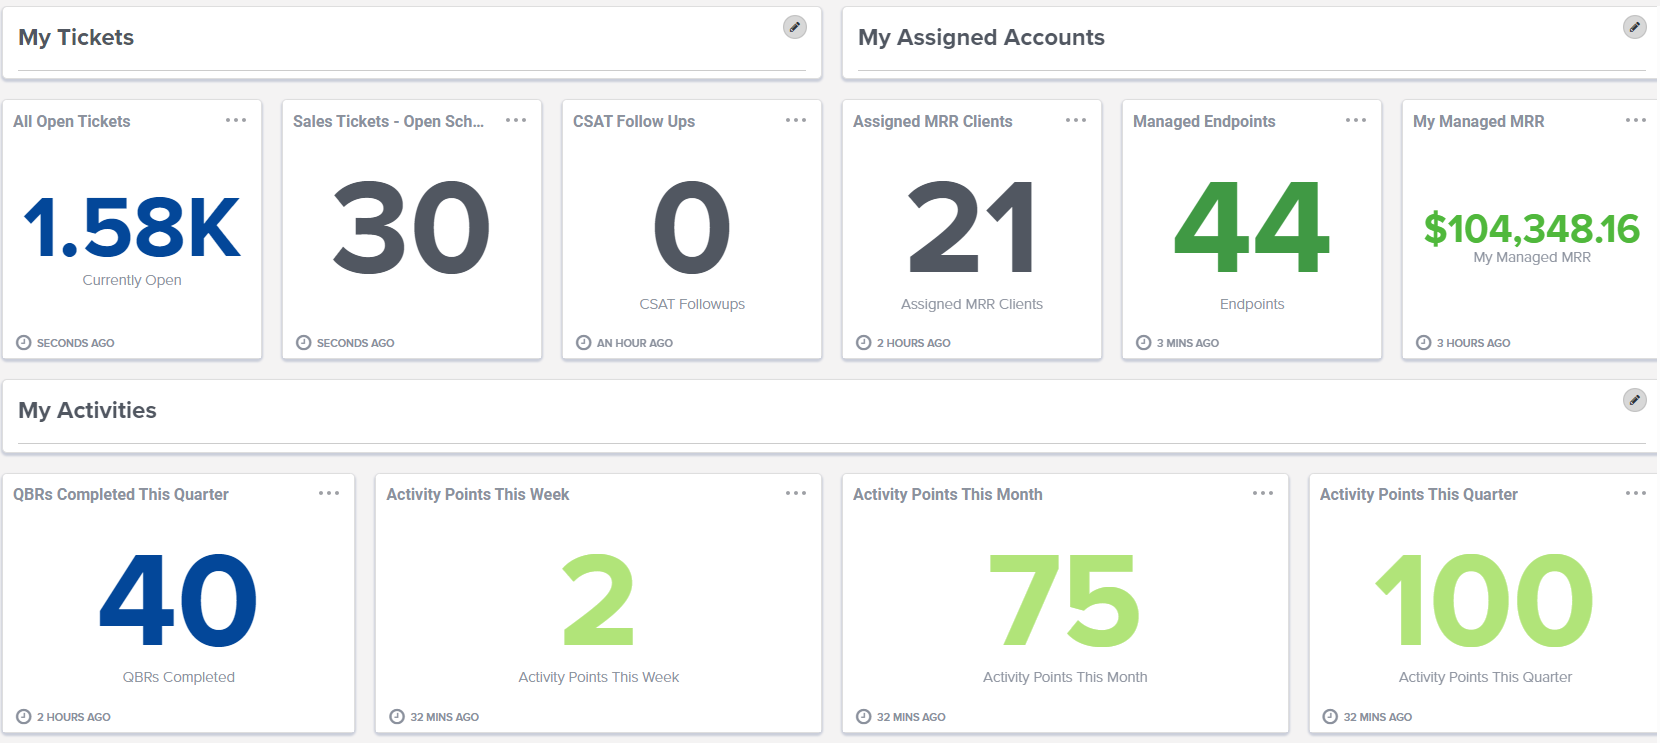 account-management-dashboard-overview